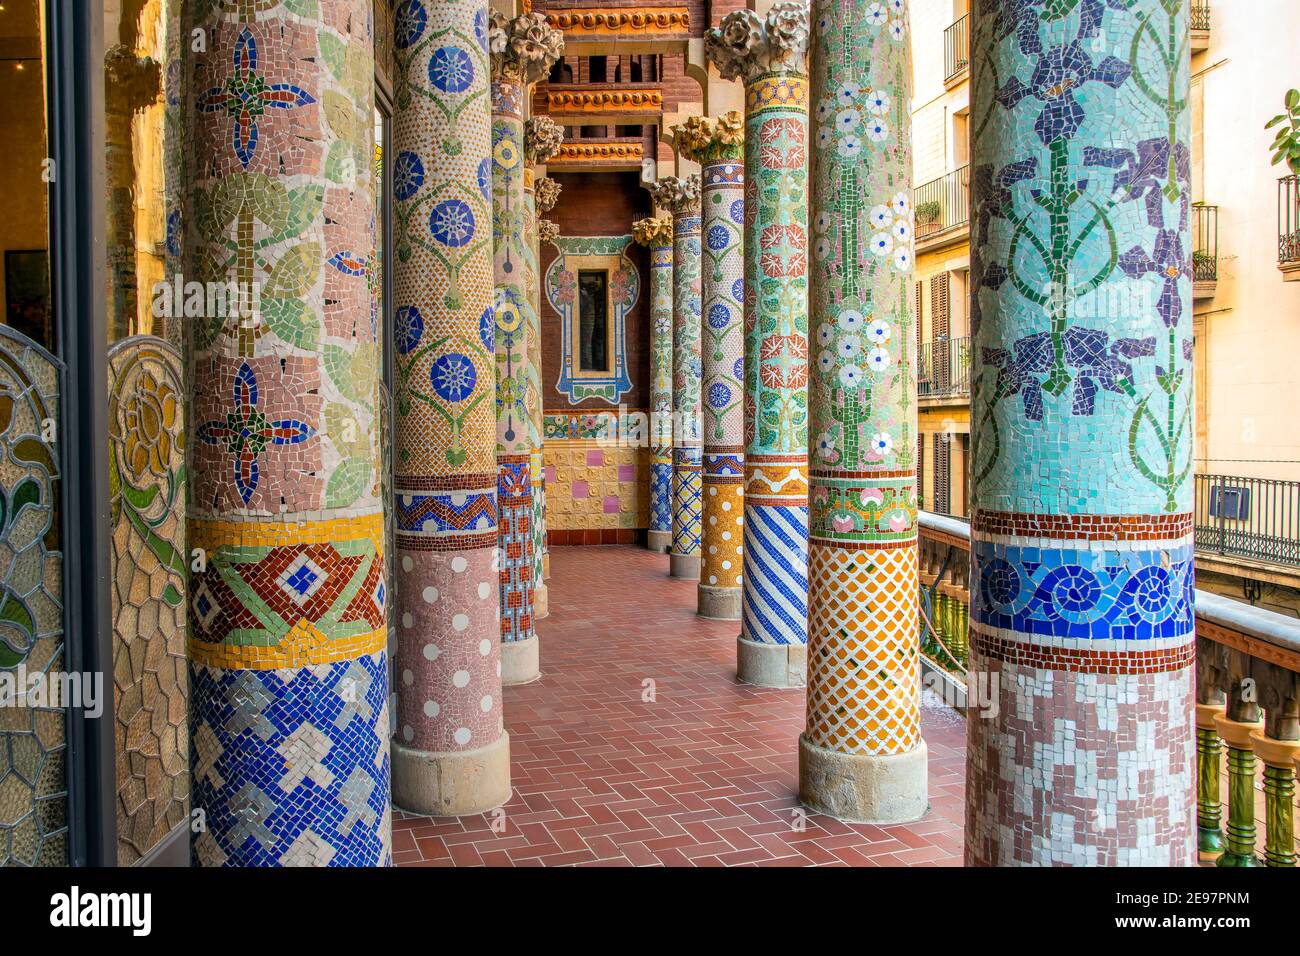 Columns tiled with mosaics, Palace of Catalan Music concert hall, Barcelona, Catalonia, Spain Stock Photo